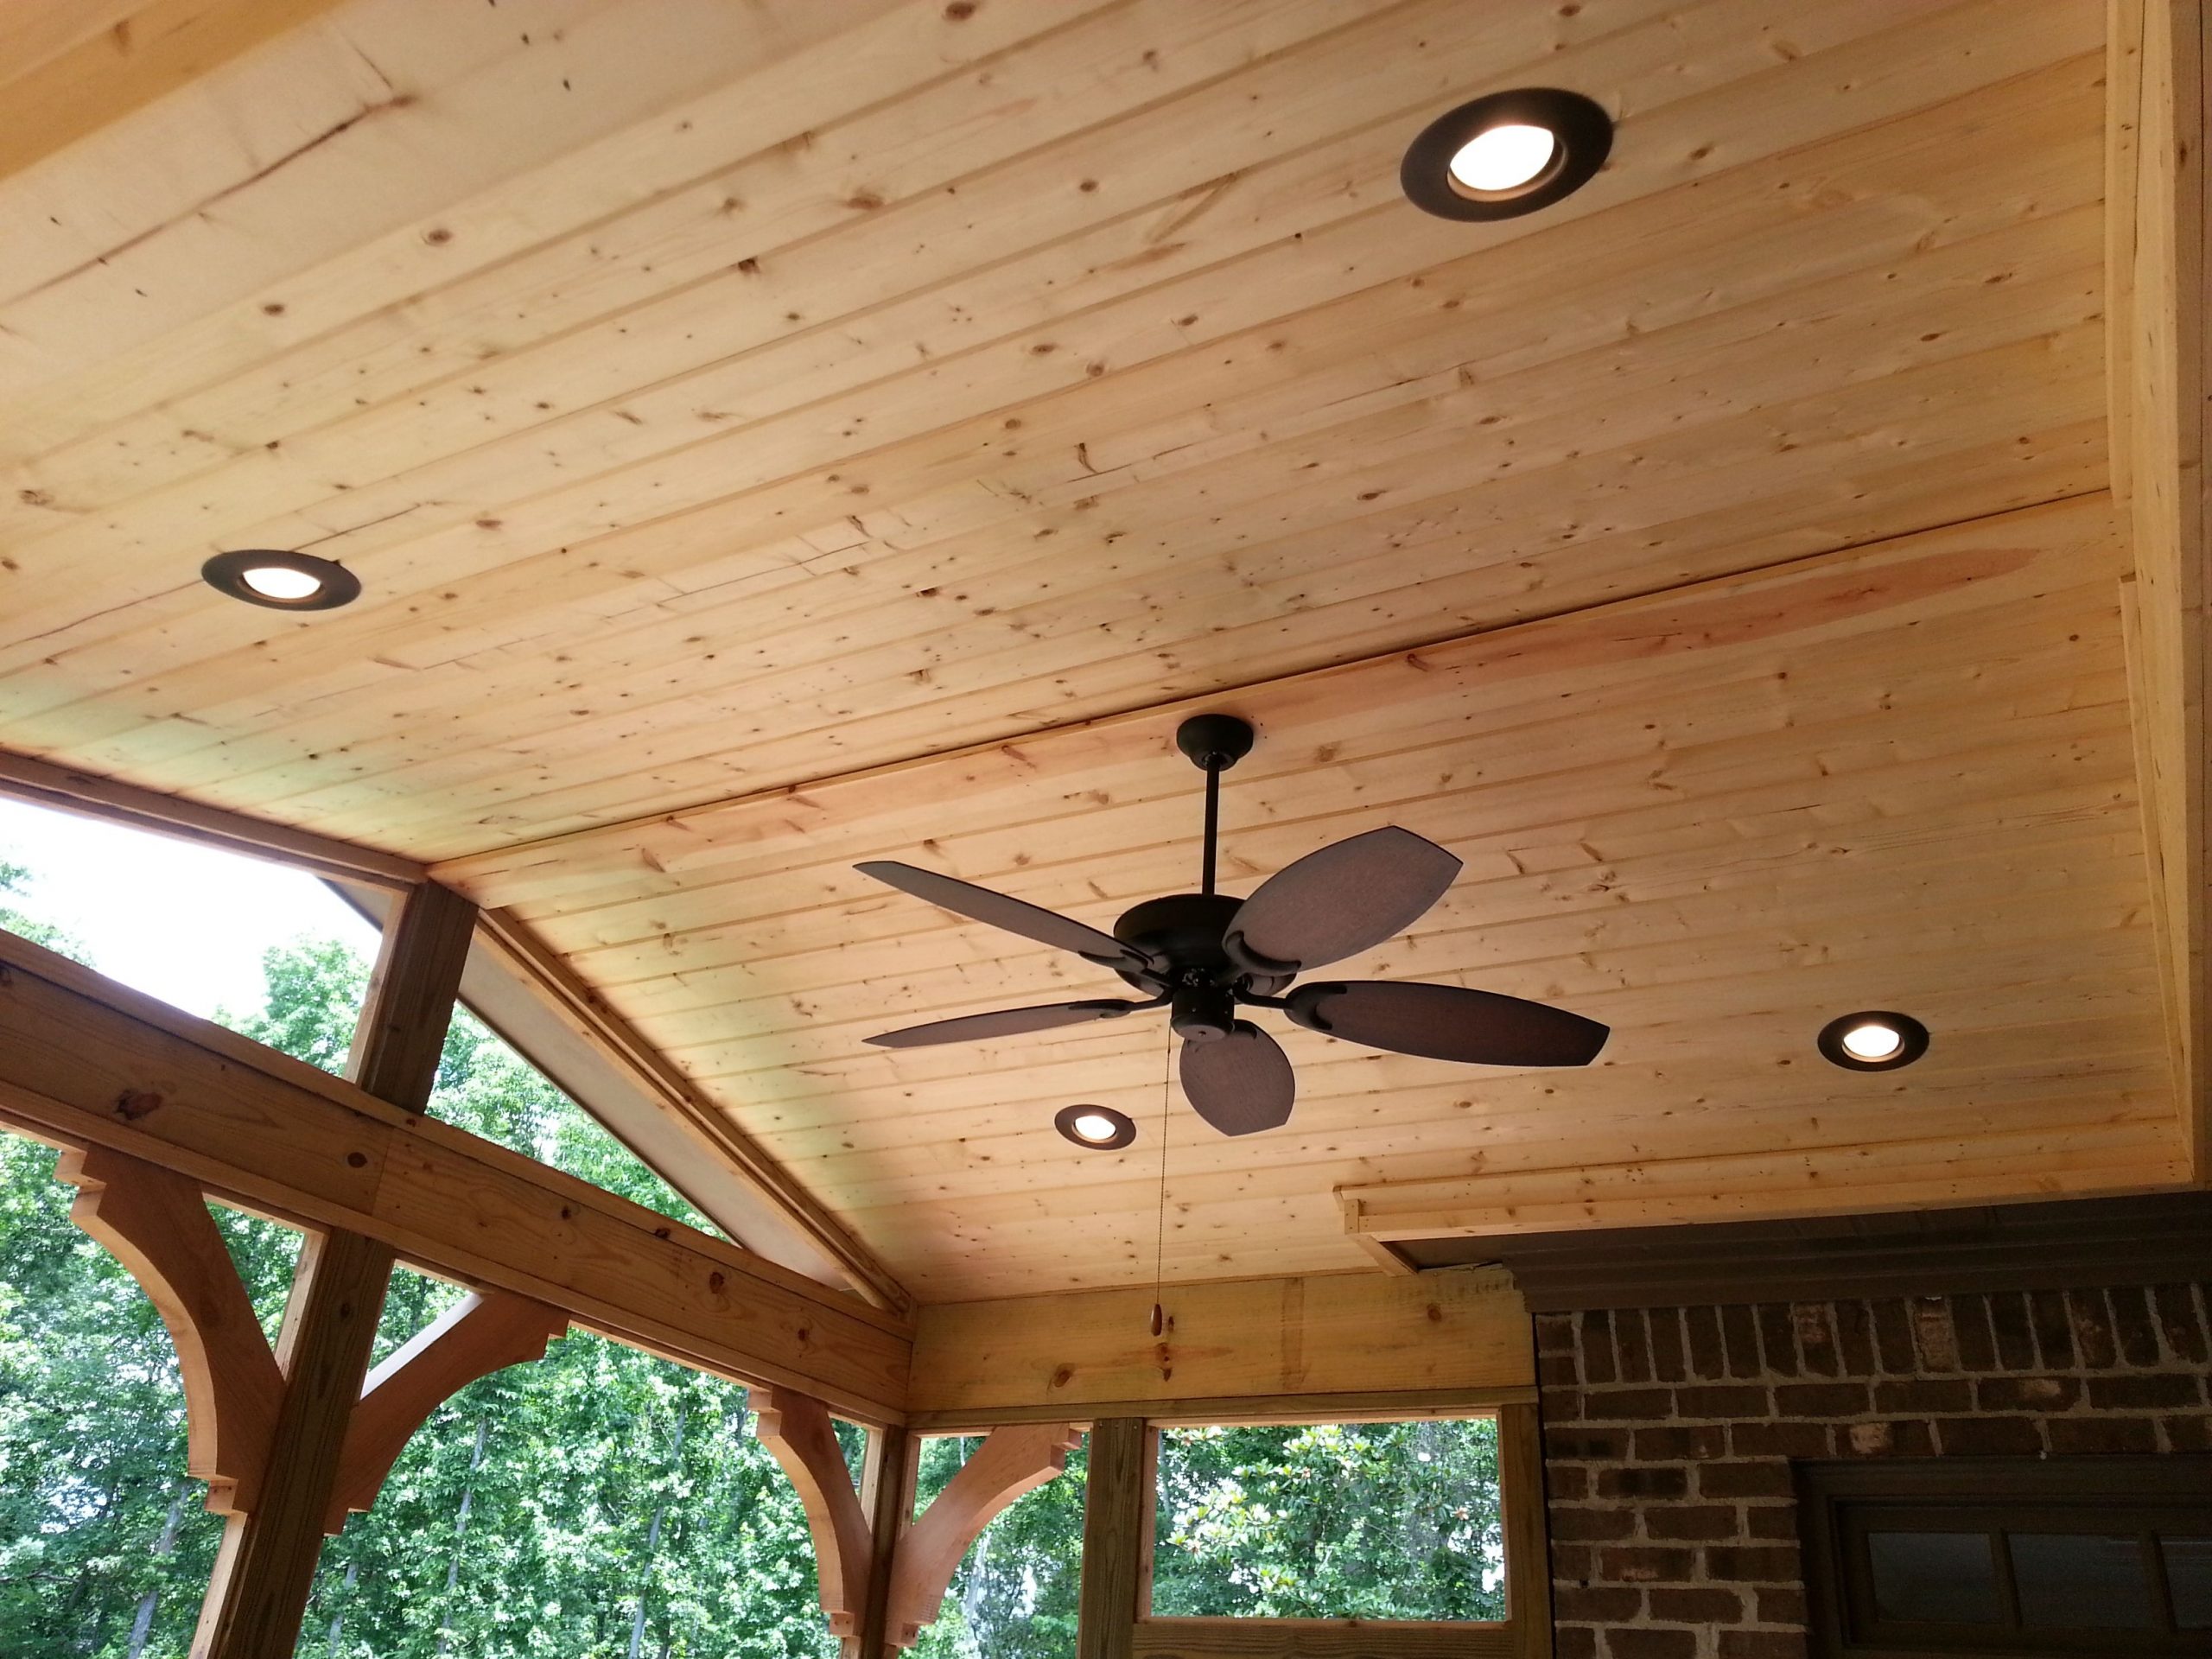 Finished Ceiling With Ceiling Fan And Can Lights Design for dimensions 3264 X 2448